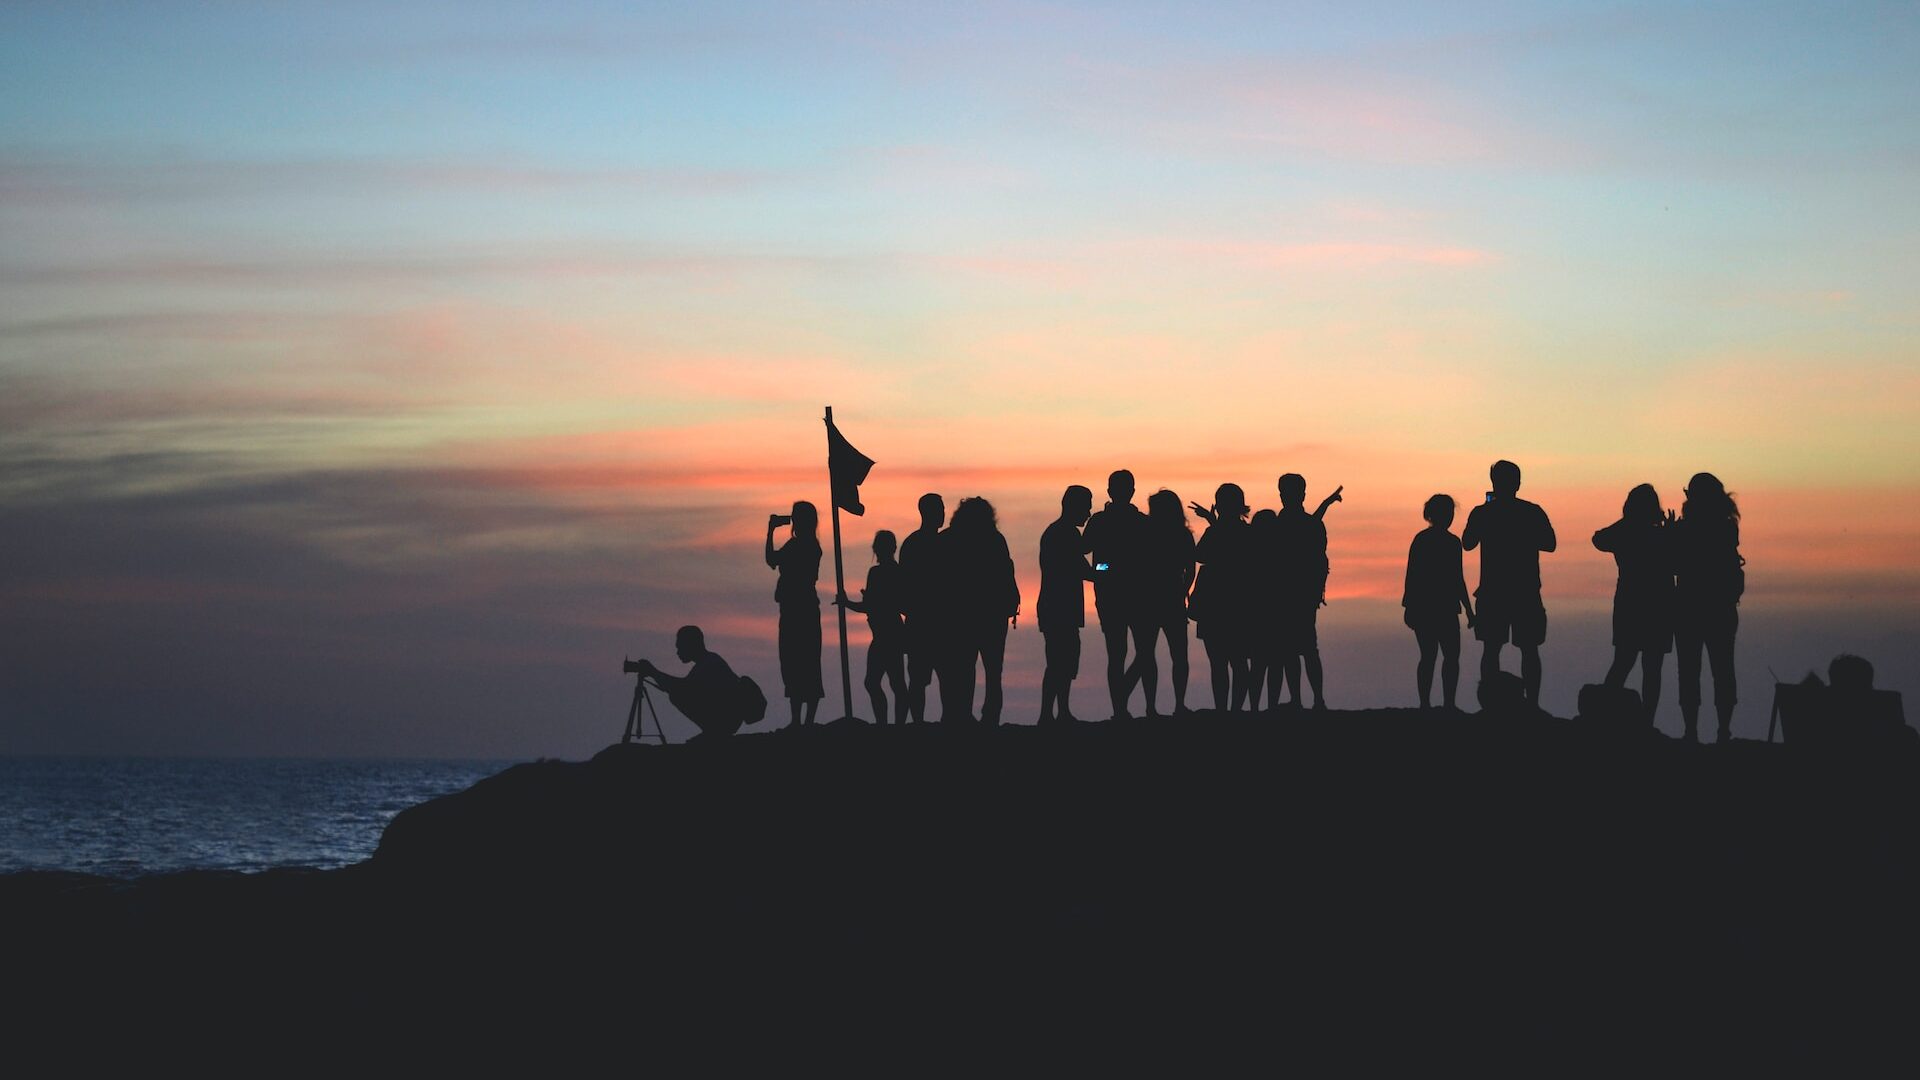 A group of people stood together overlooking the sea at dusk.